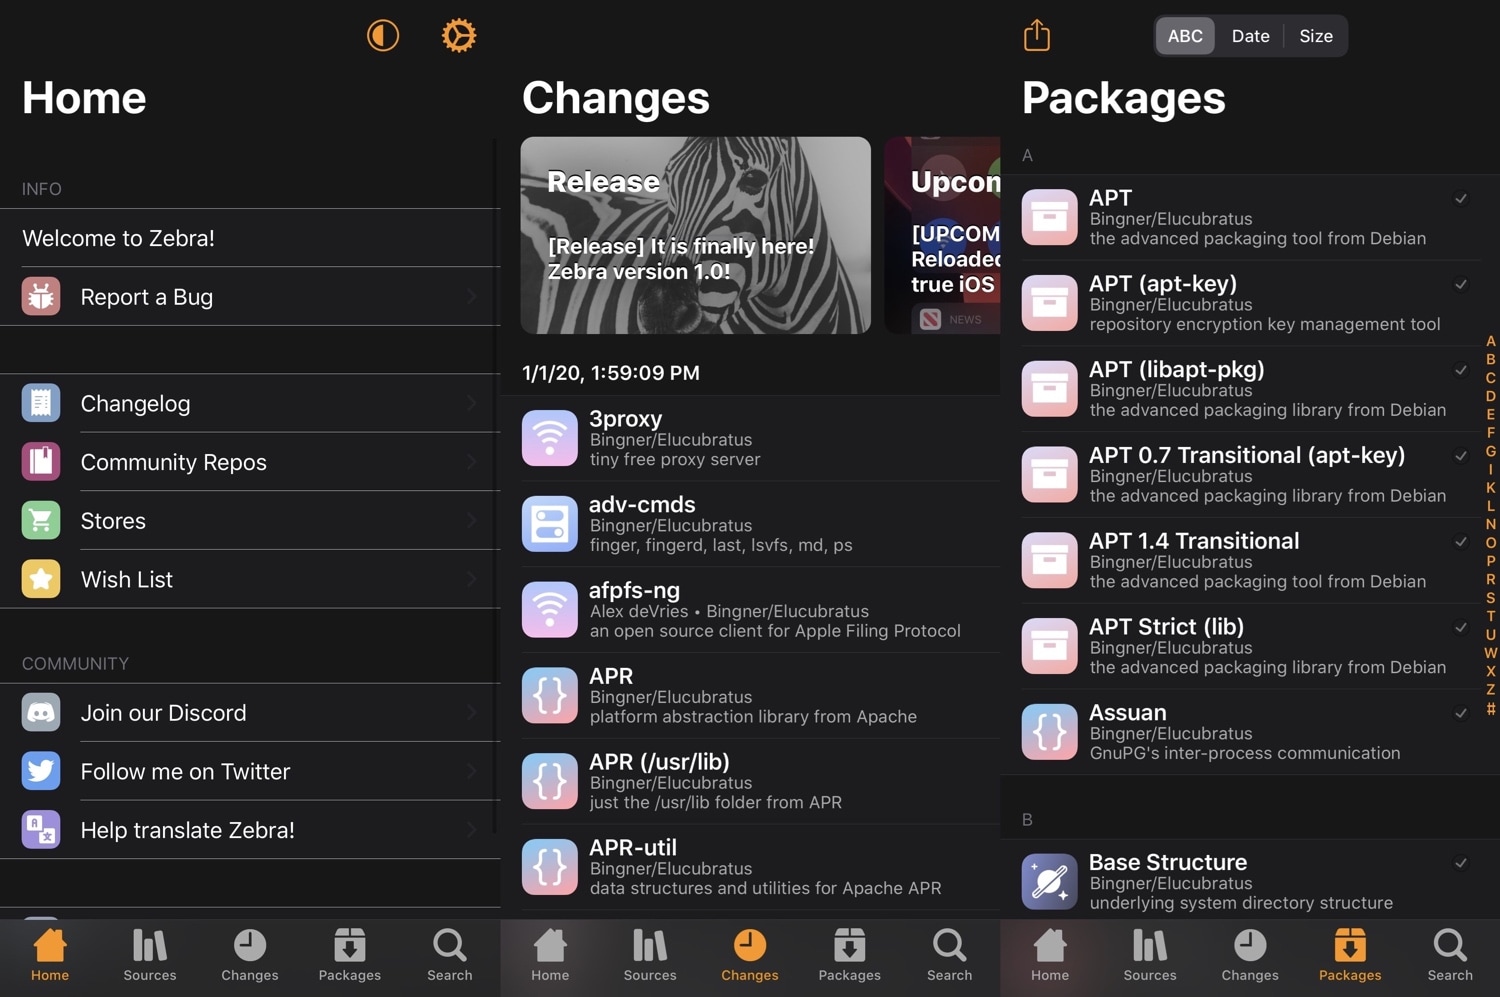 Zebra V1 0 2 Update Addresses Issue With Upgrading Cydia Substrate